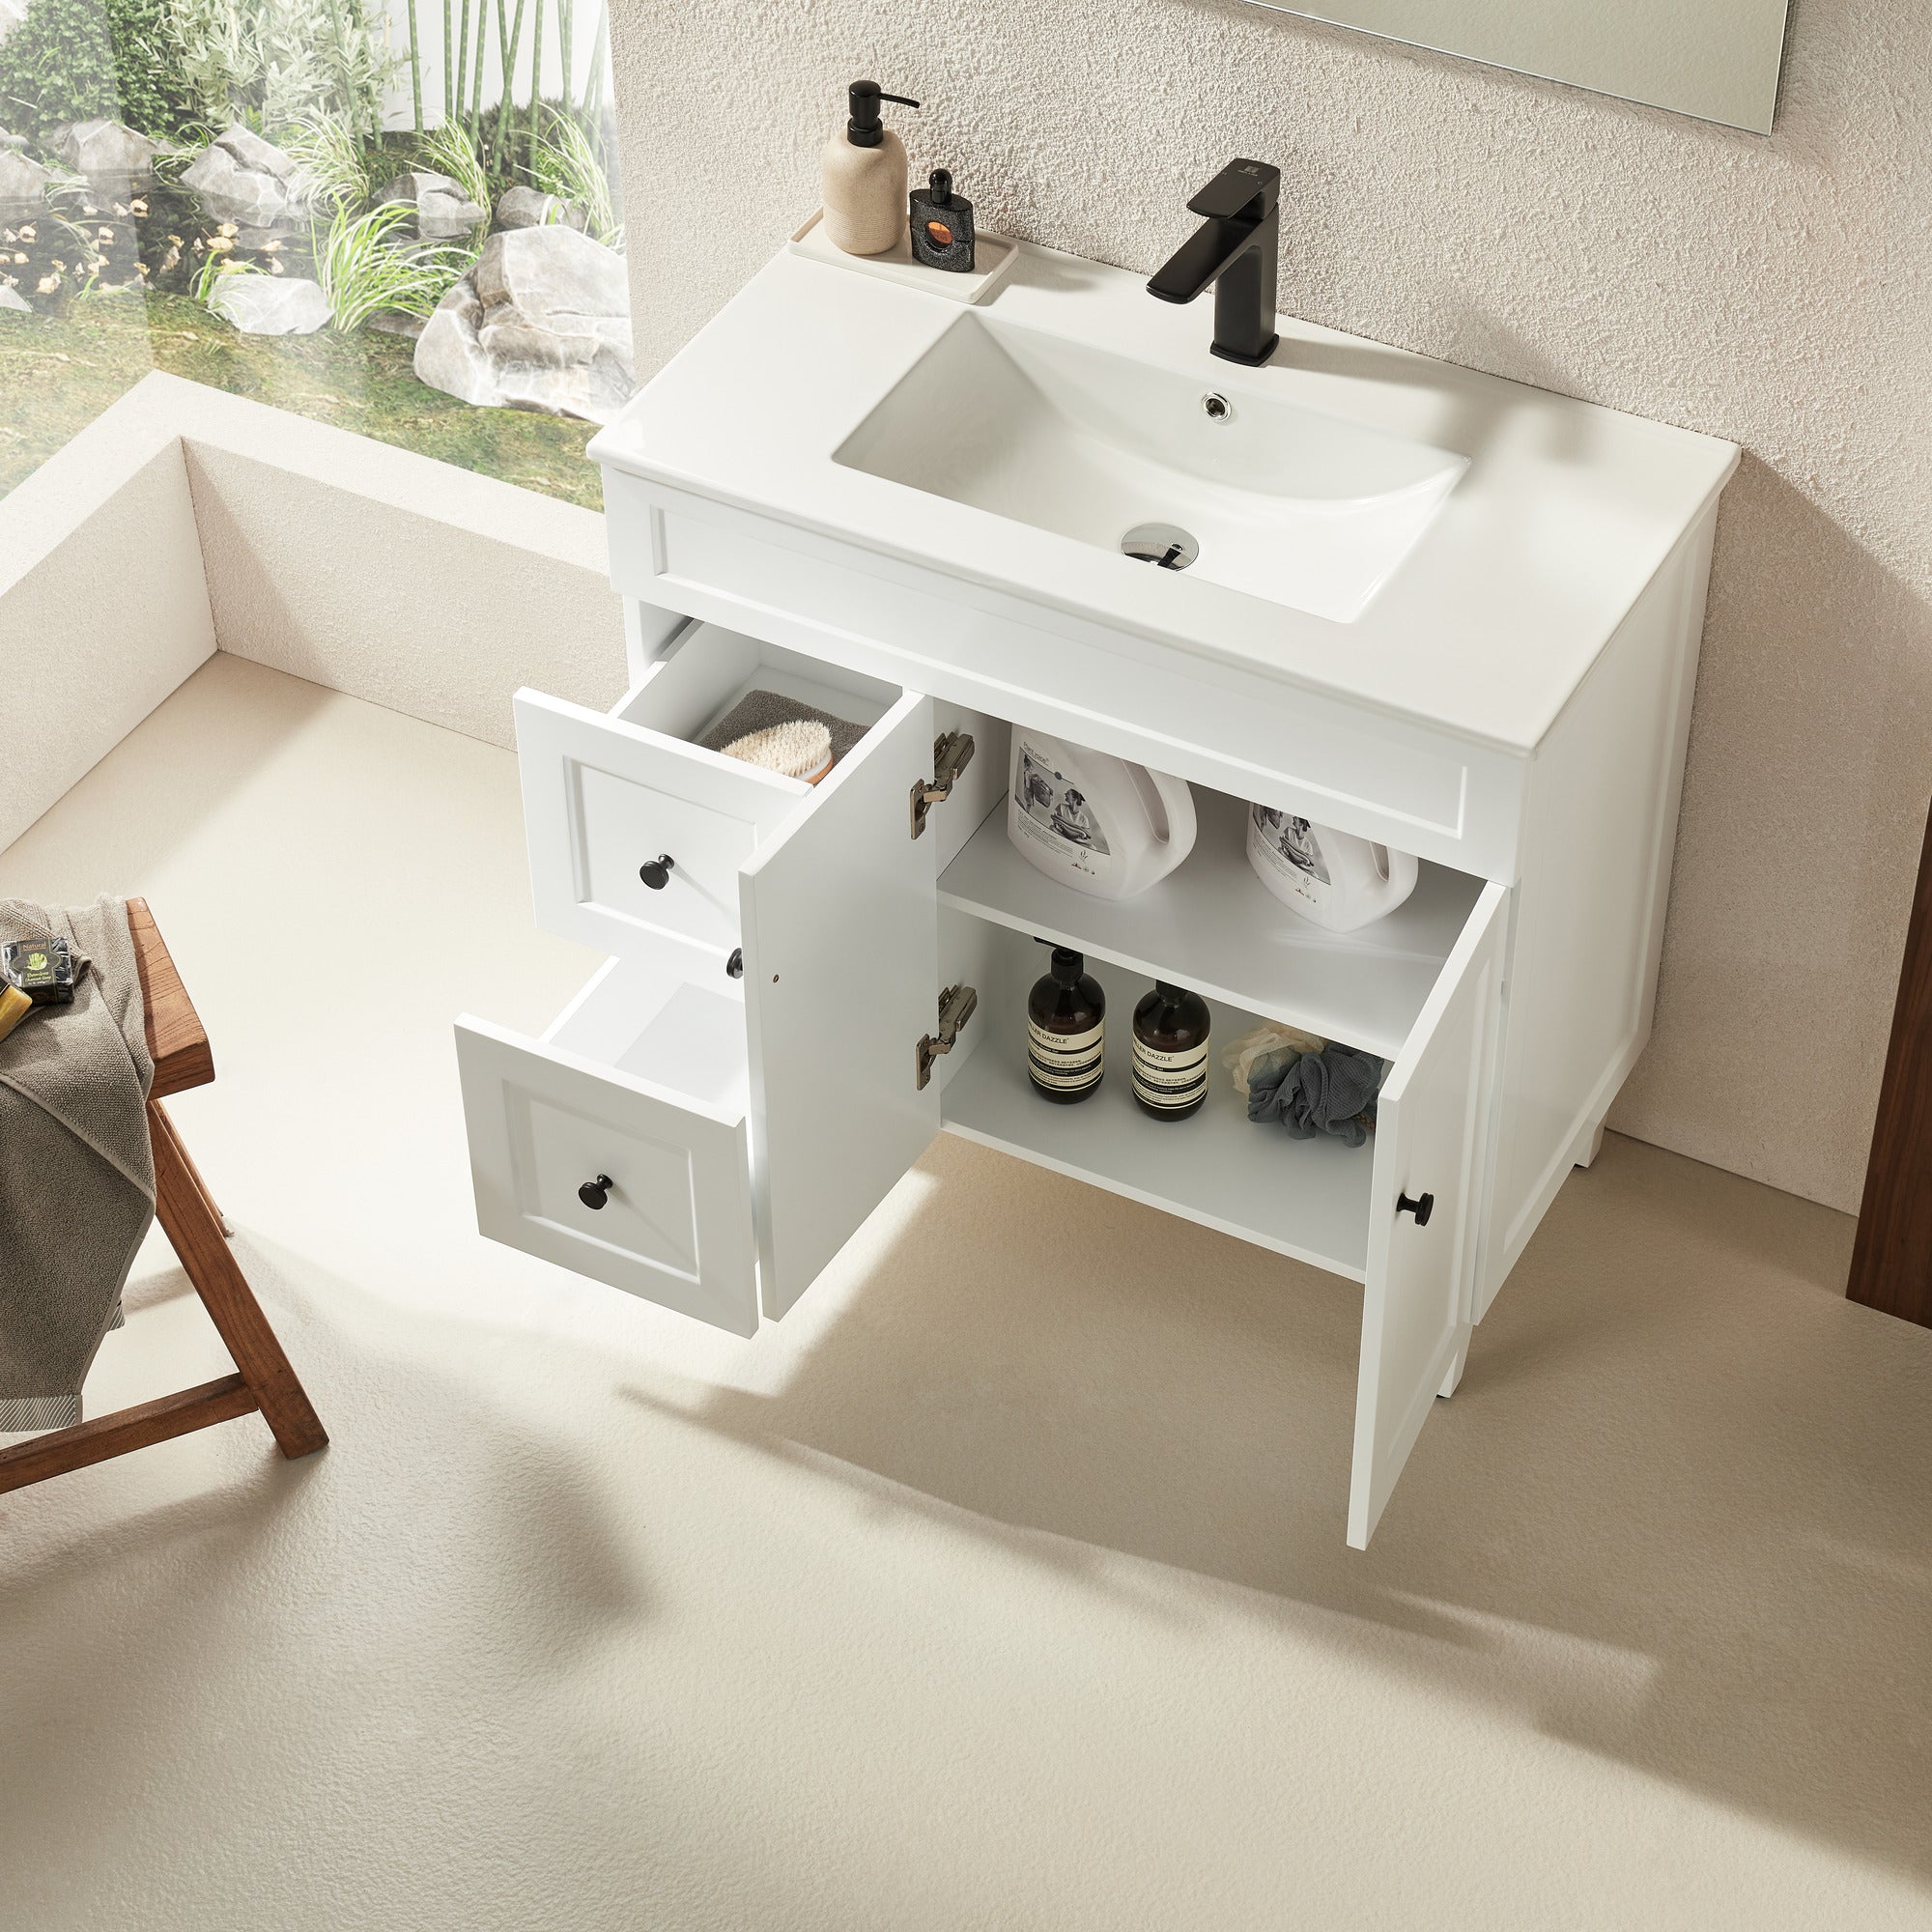 CETO HARRINGTON MATTE WHITE 900MM SINGLE BOWL FLOOR STANDING VANITY (AVAILABLE IN LEFT AND RIGHT HAND DRAWER)